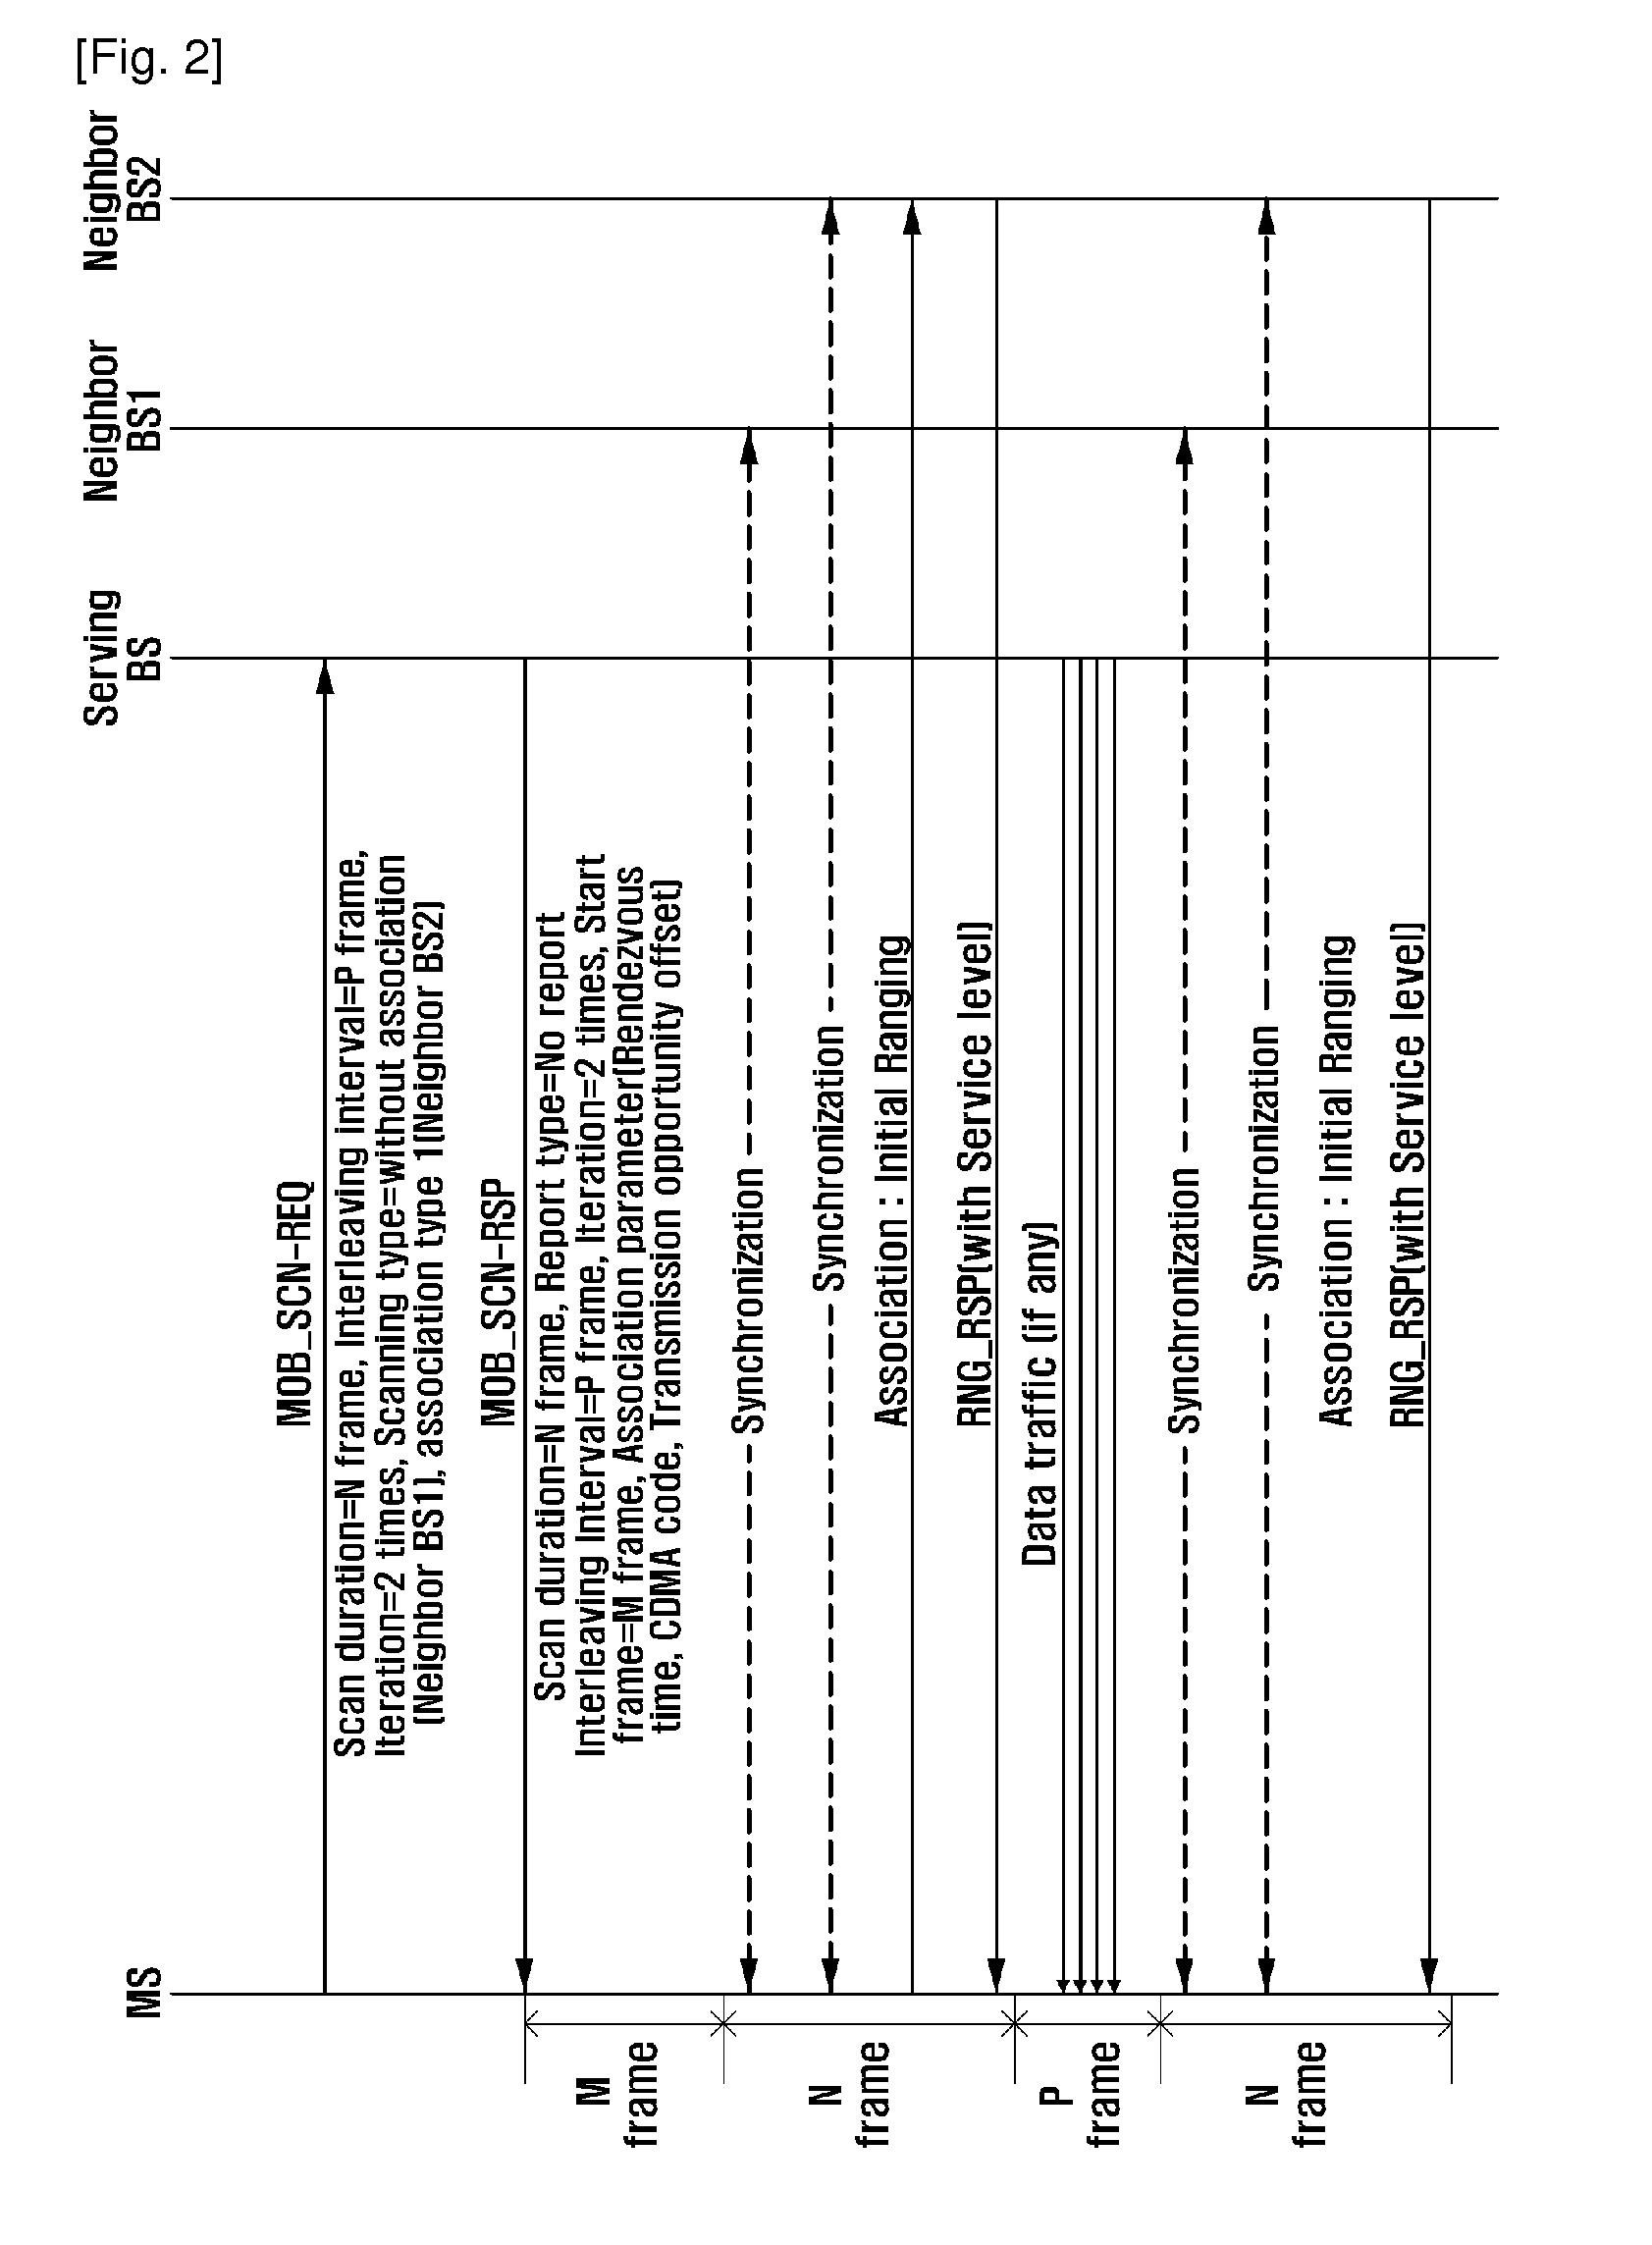 Cooperative scanning-based cell reselection method and system in wireless communication system